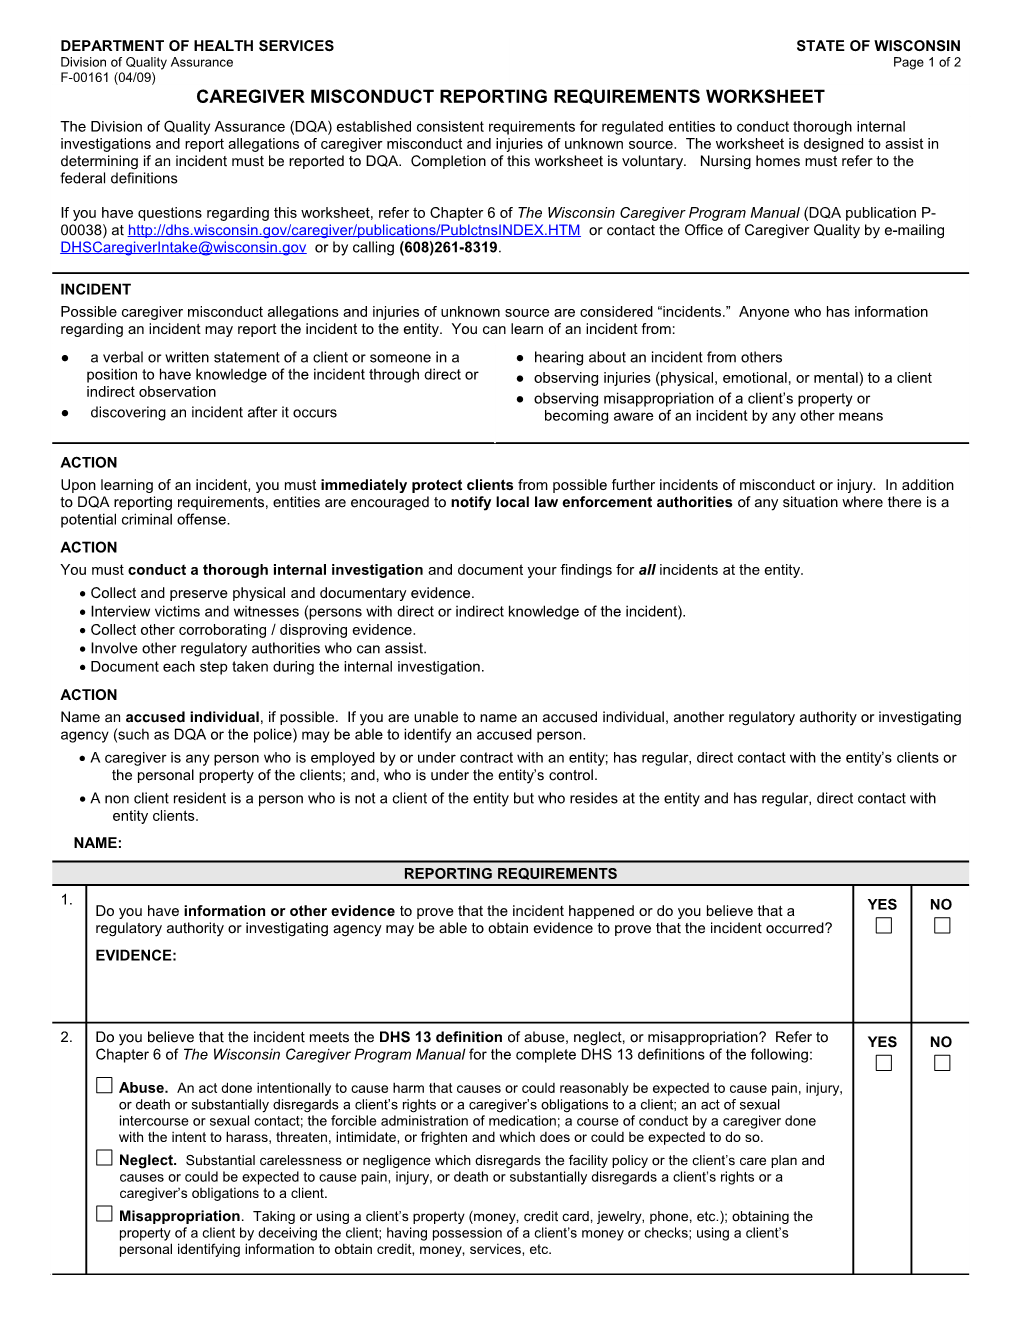 Caregiver Misconduct Reporting Requirements Worksheet, F-00161